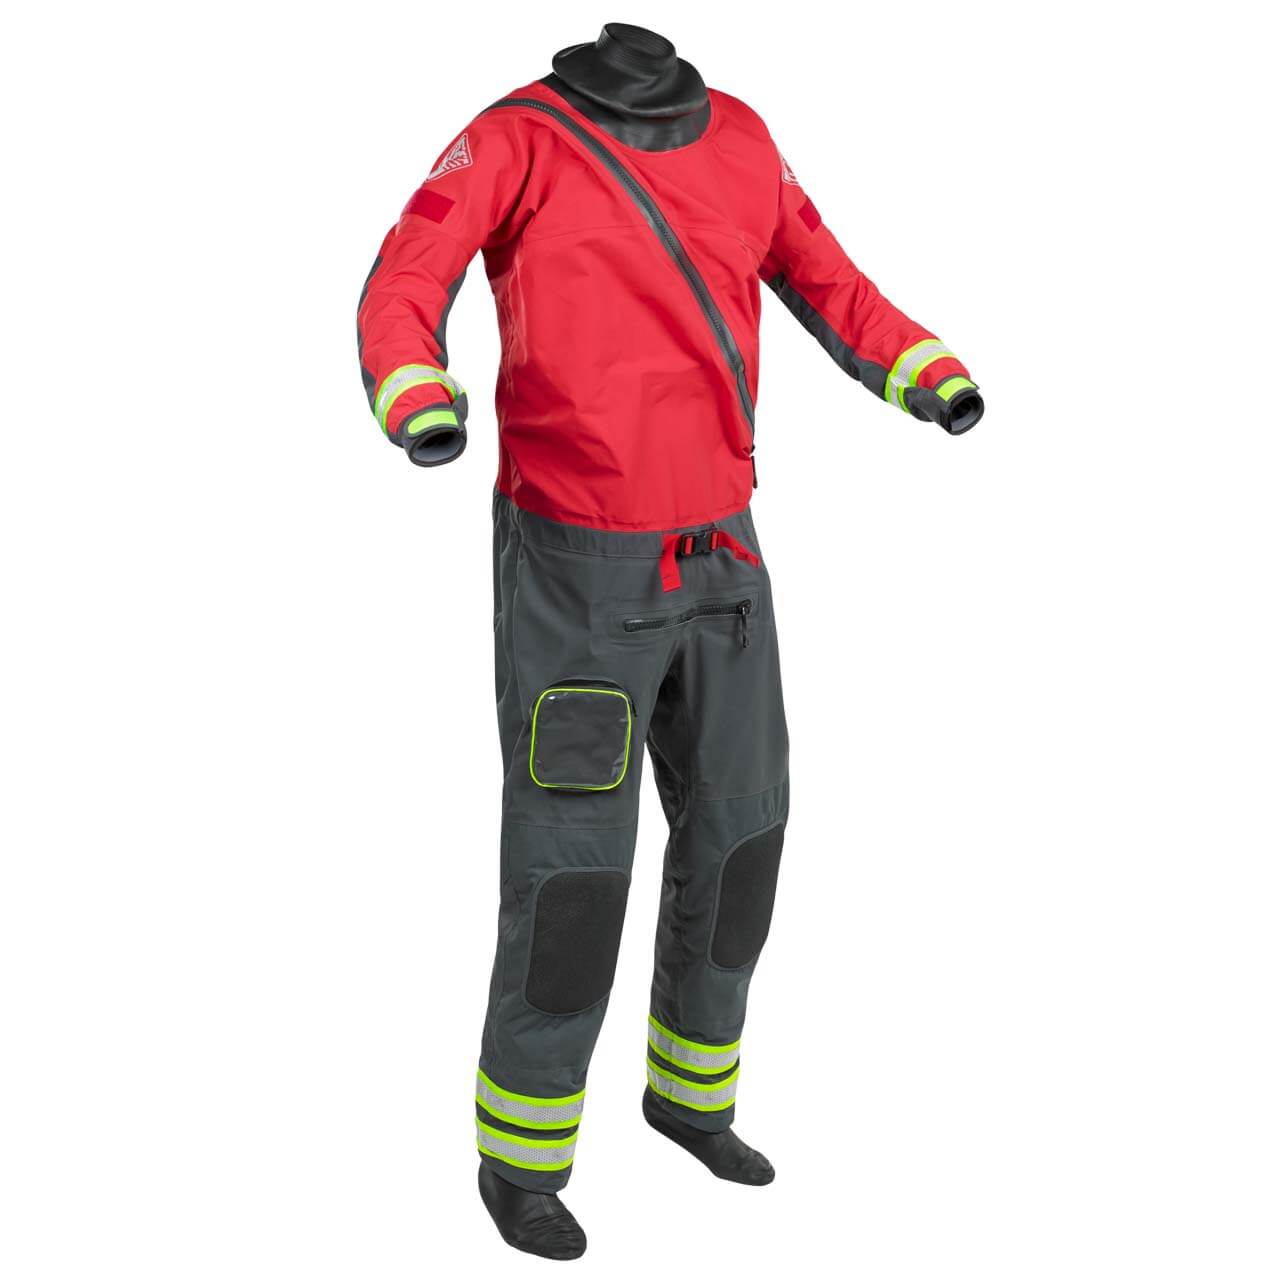 Palm Rescue Dry Suit - Red/Jet Grey, MB von Palm Equipment}